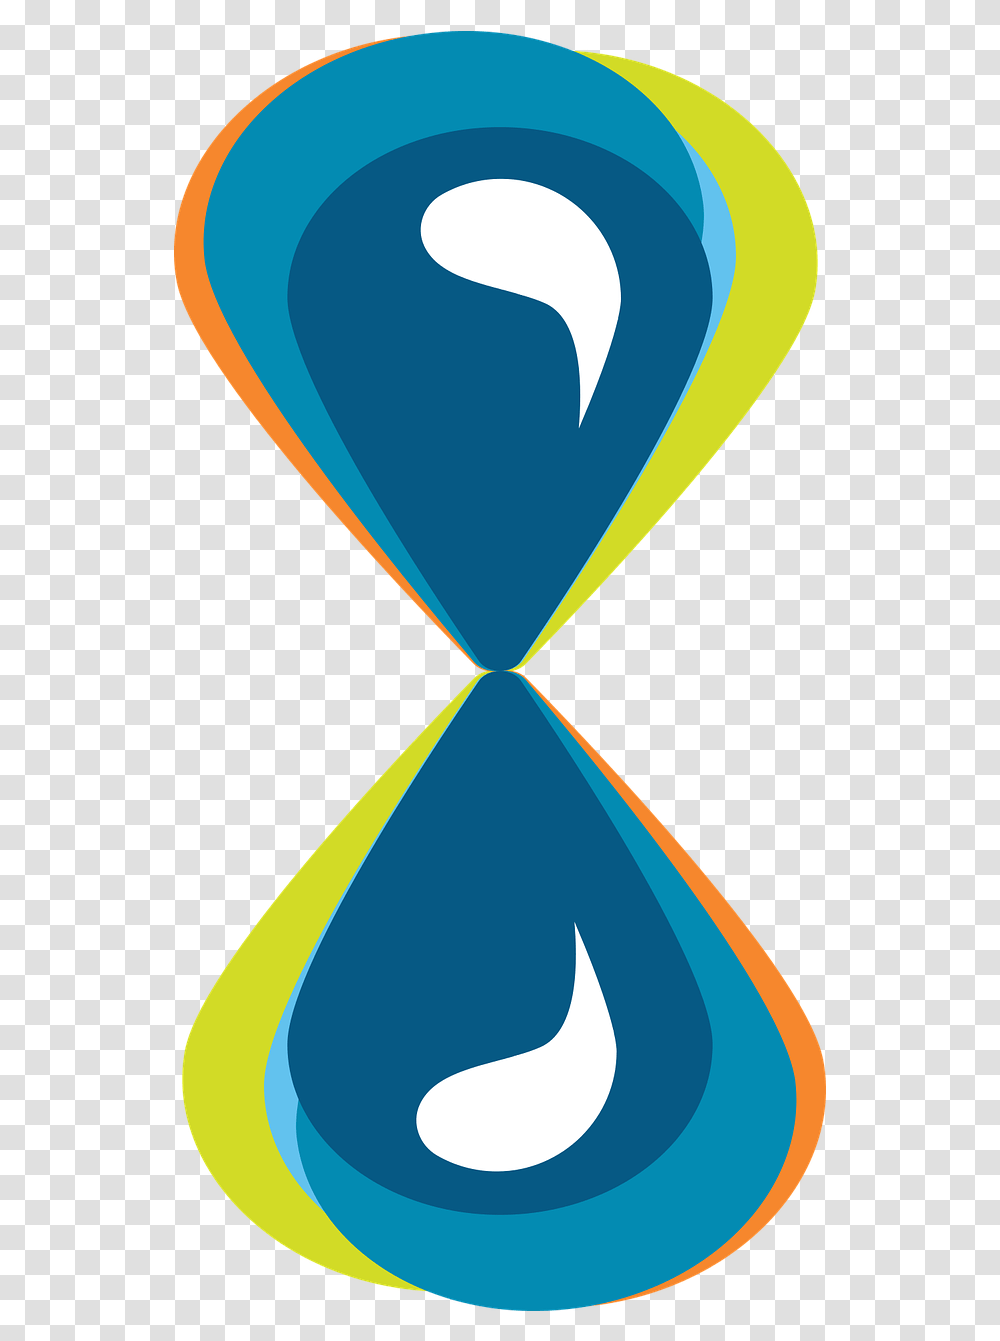 Hourglass Water Free Vector Graphic On Pixabay Reloj De Agua, Triangle Transparent Png